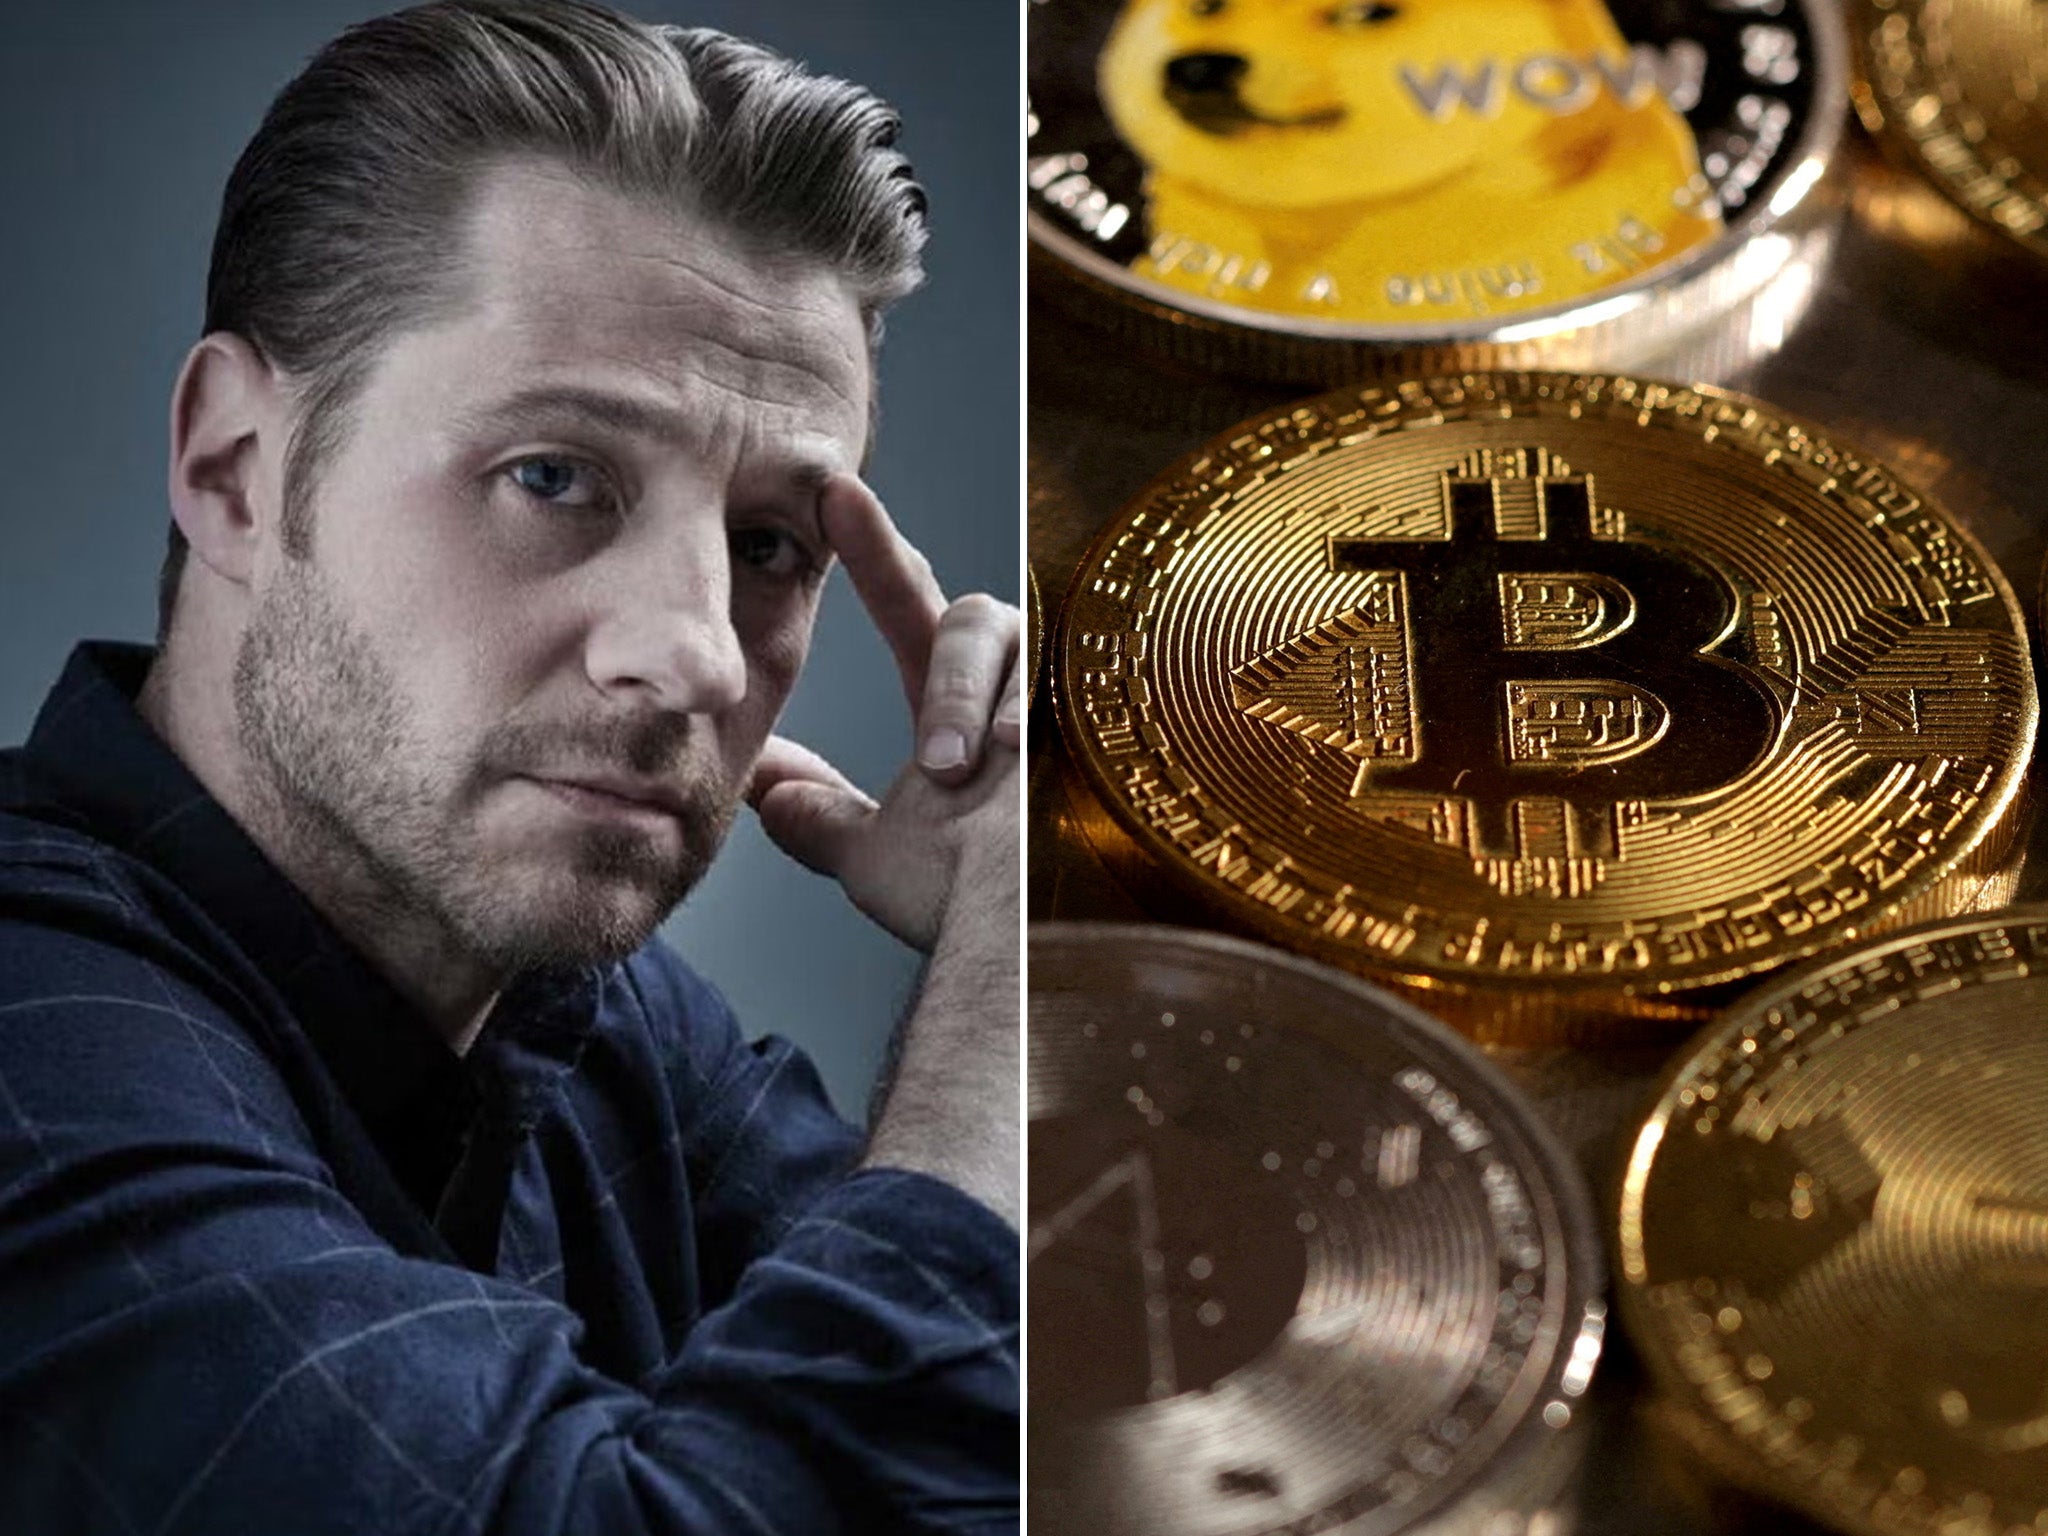 Actor-turned-investigative journalist Ben McKenzie has a dire warning about crypto